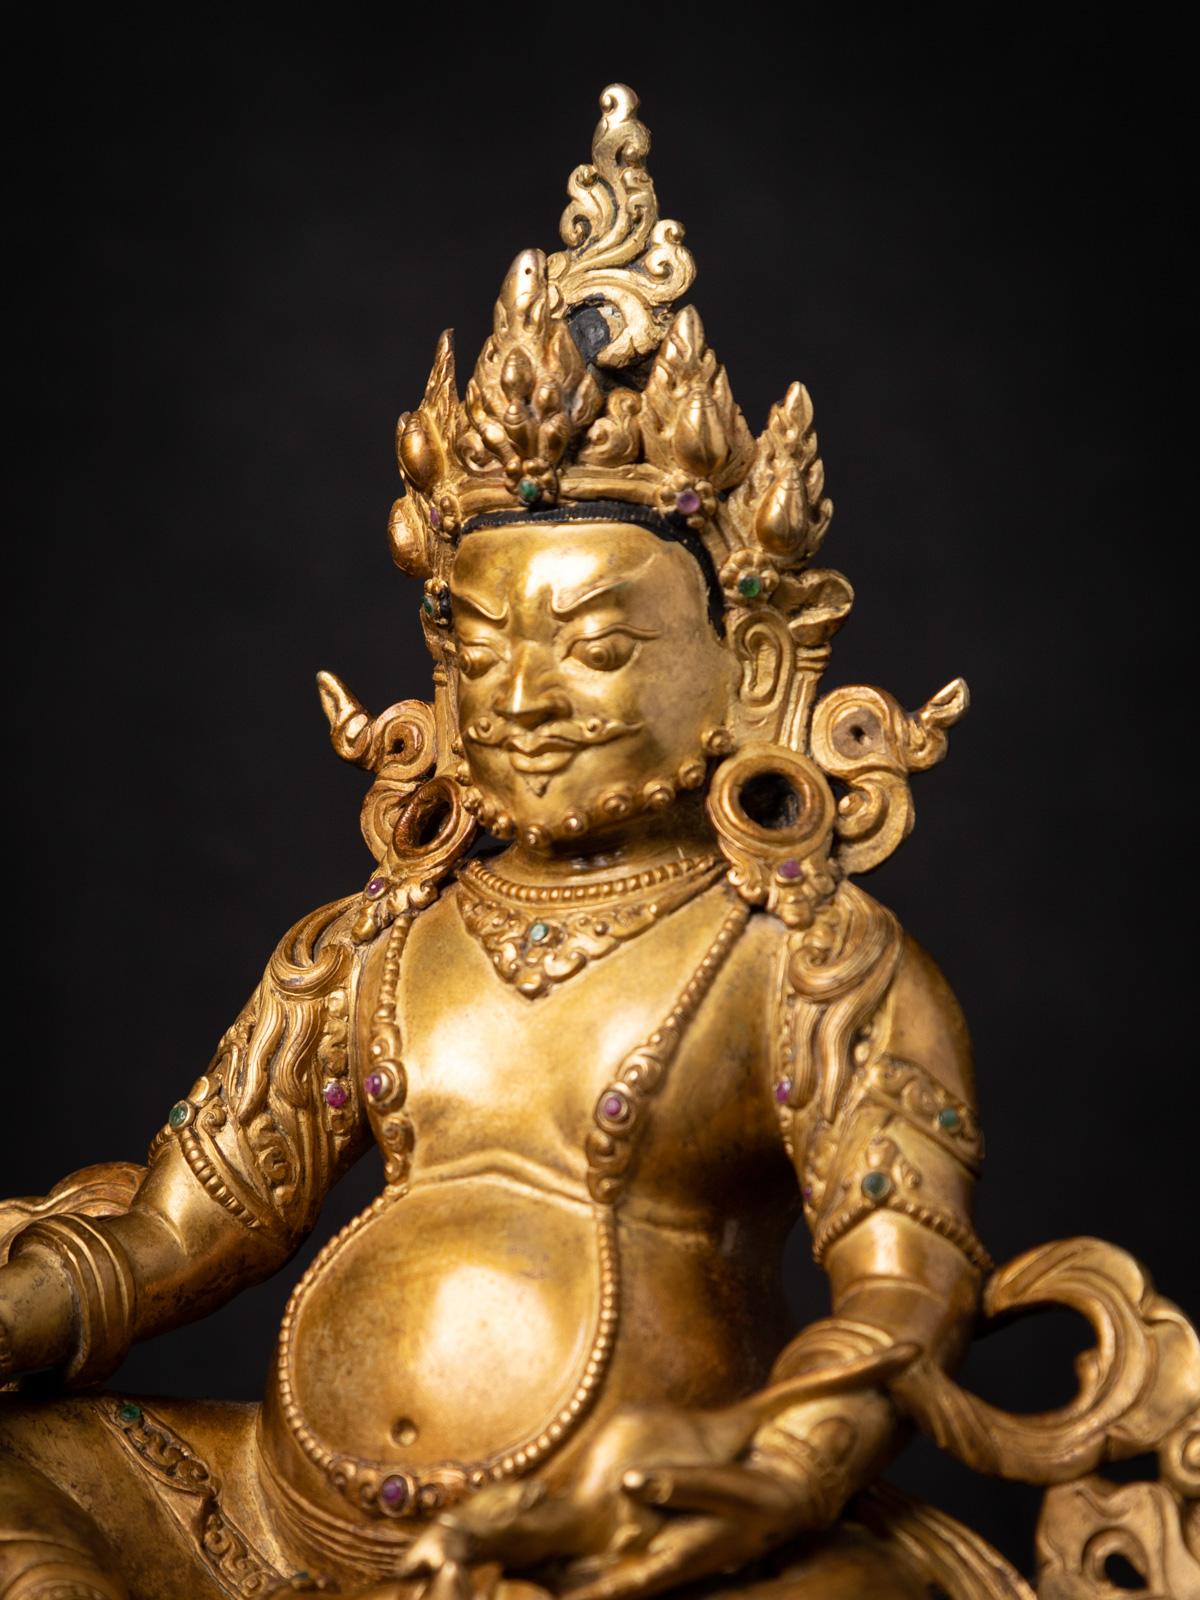 20th Century Mid-20th century Old bronze Nepali Kuber statue fire gilded with 24 krt. gold